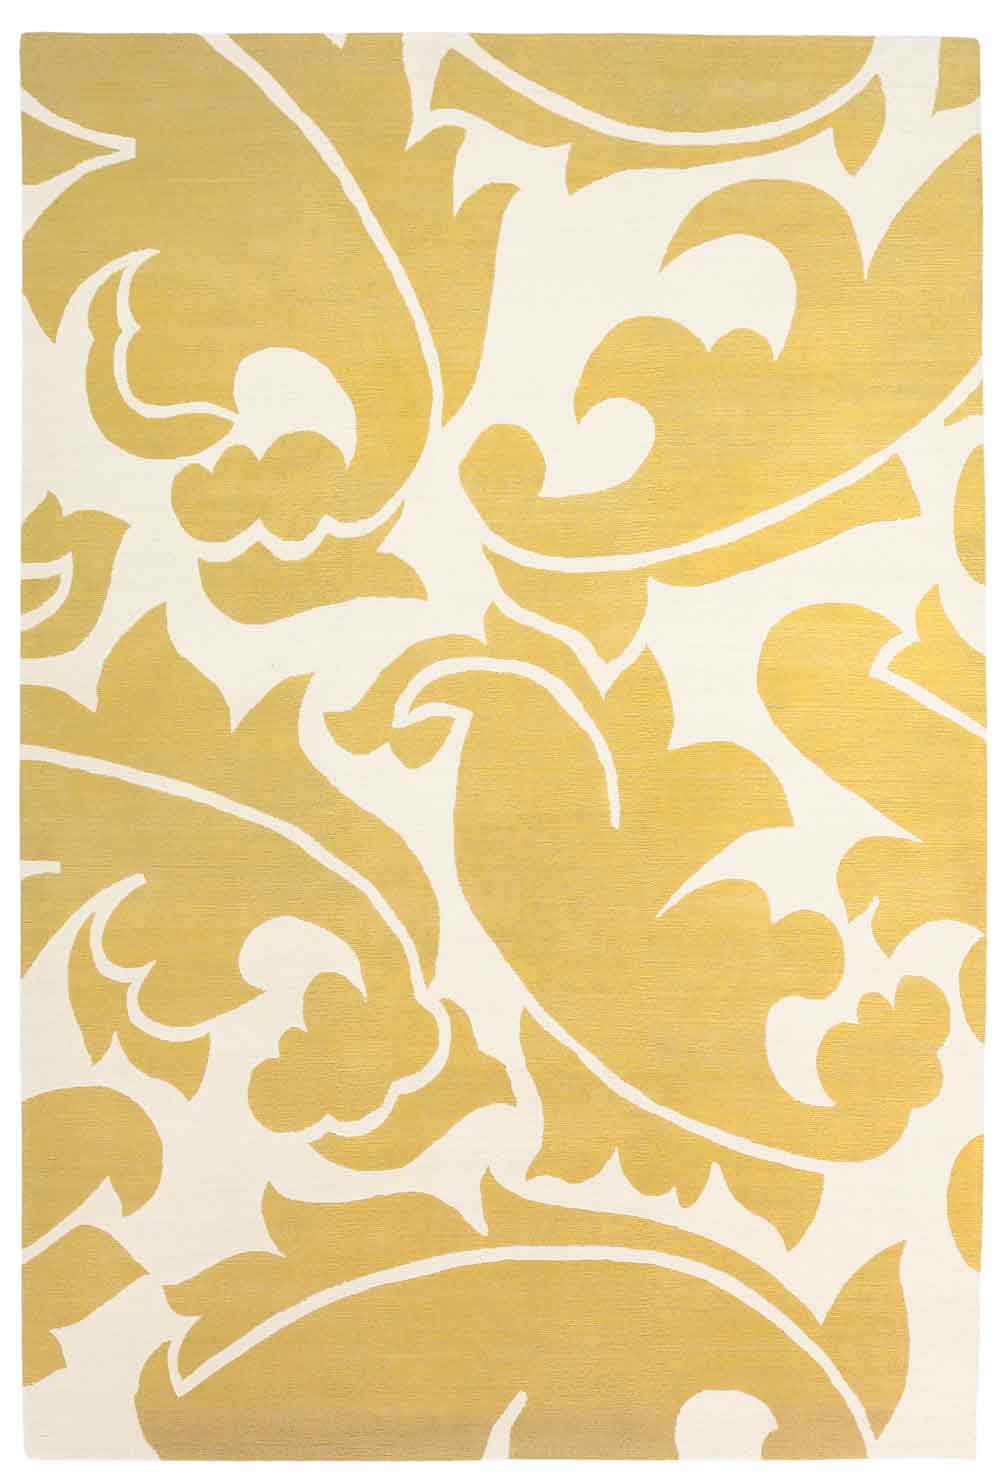 The Rug Company has also been working with top end designers for a long time, and produced Overleaf in Yellow for Marni